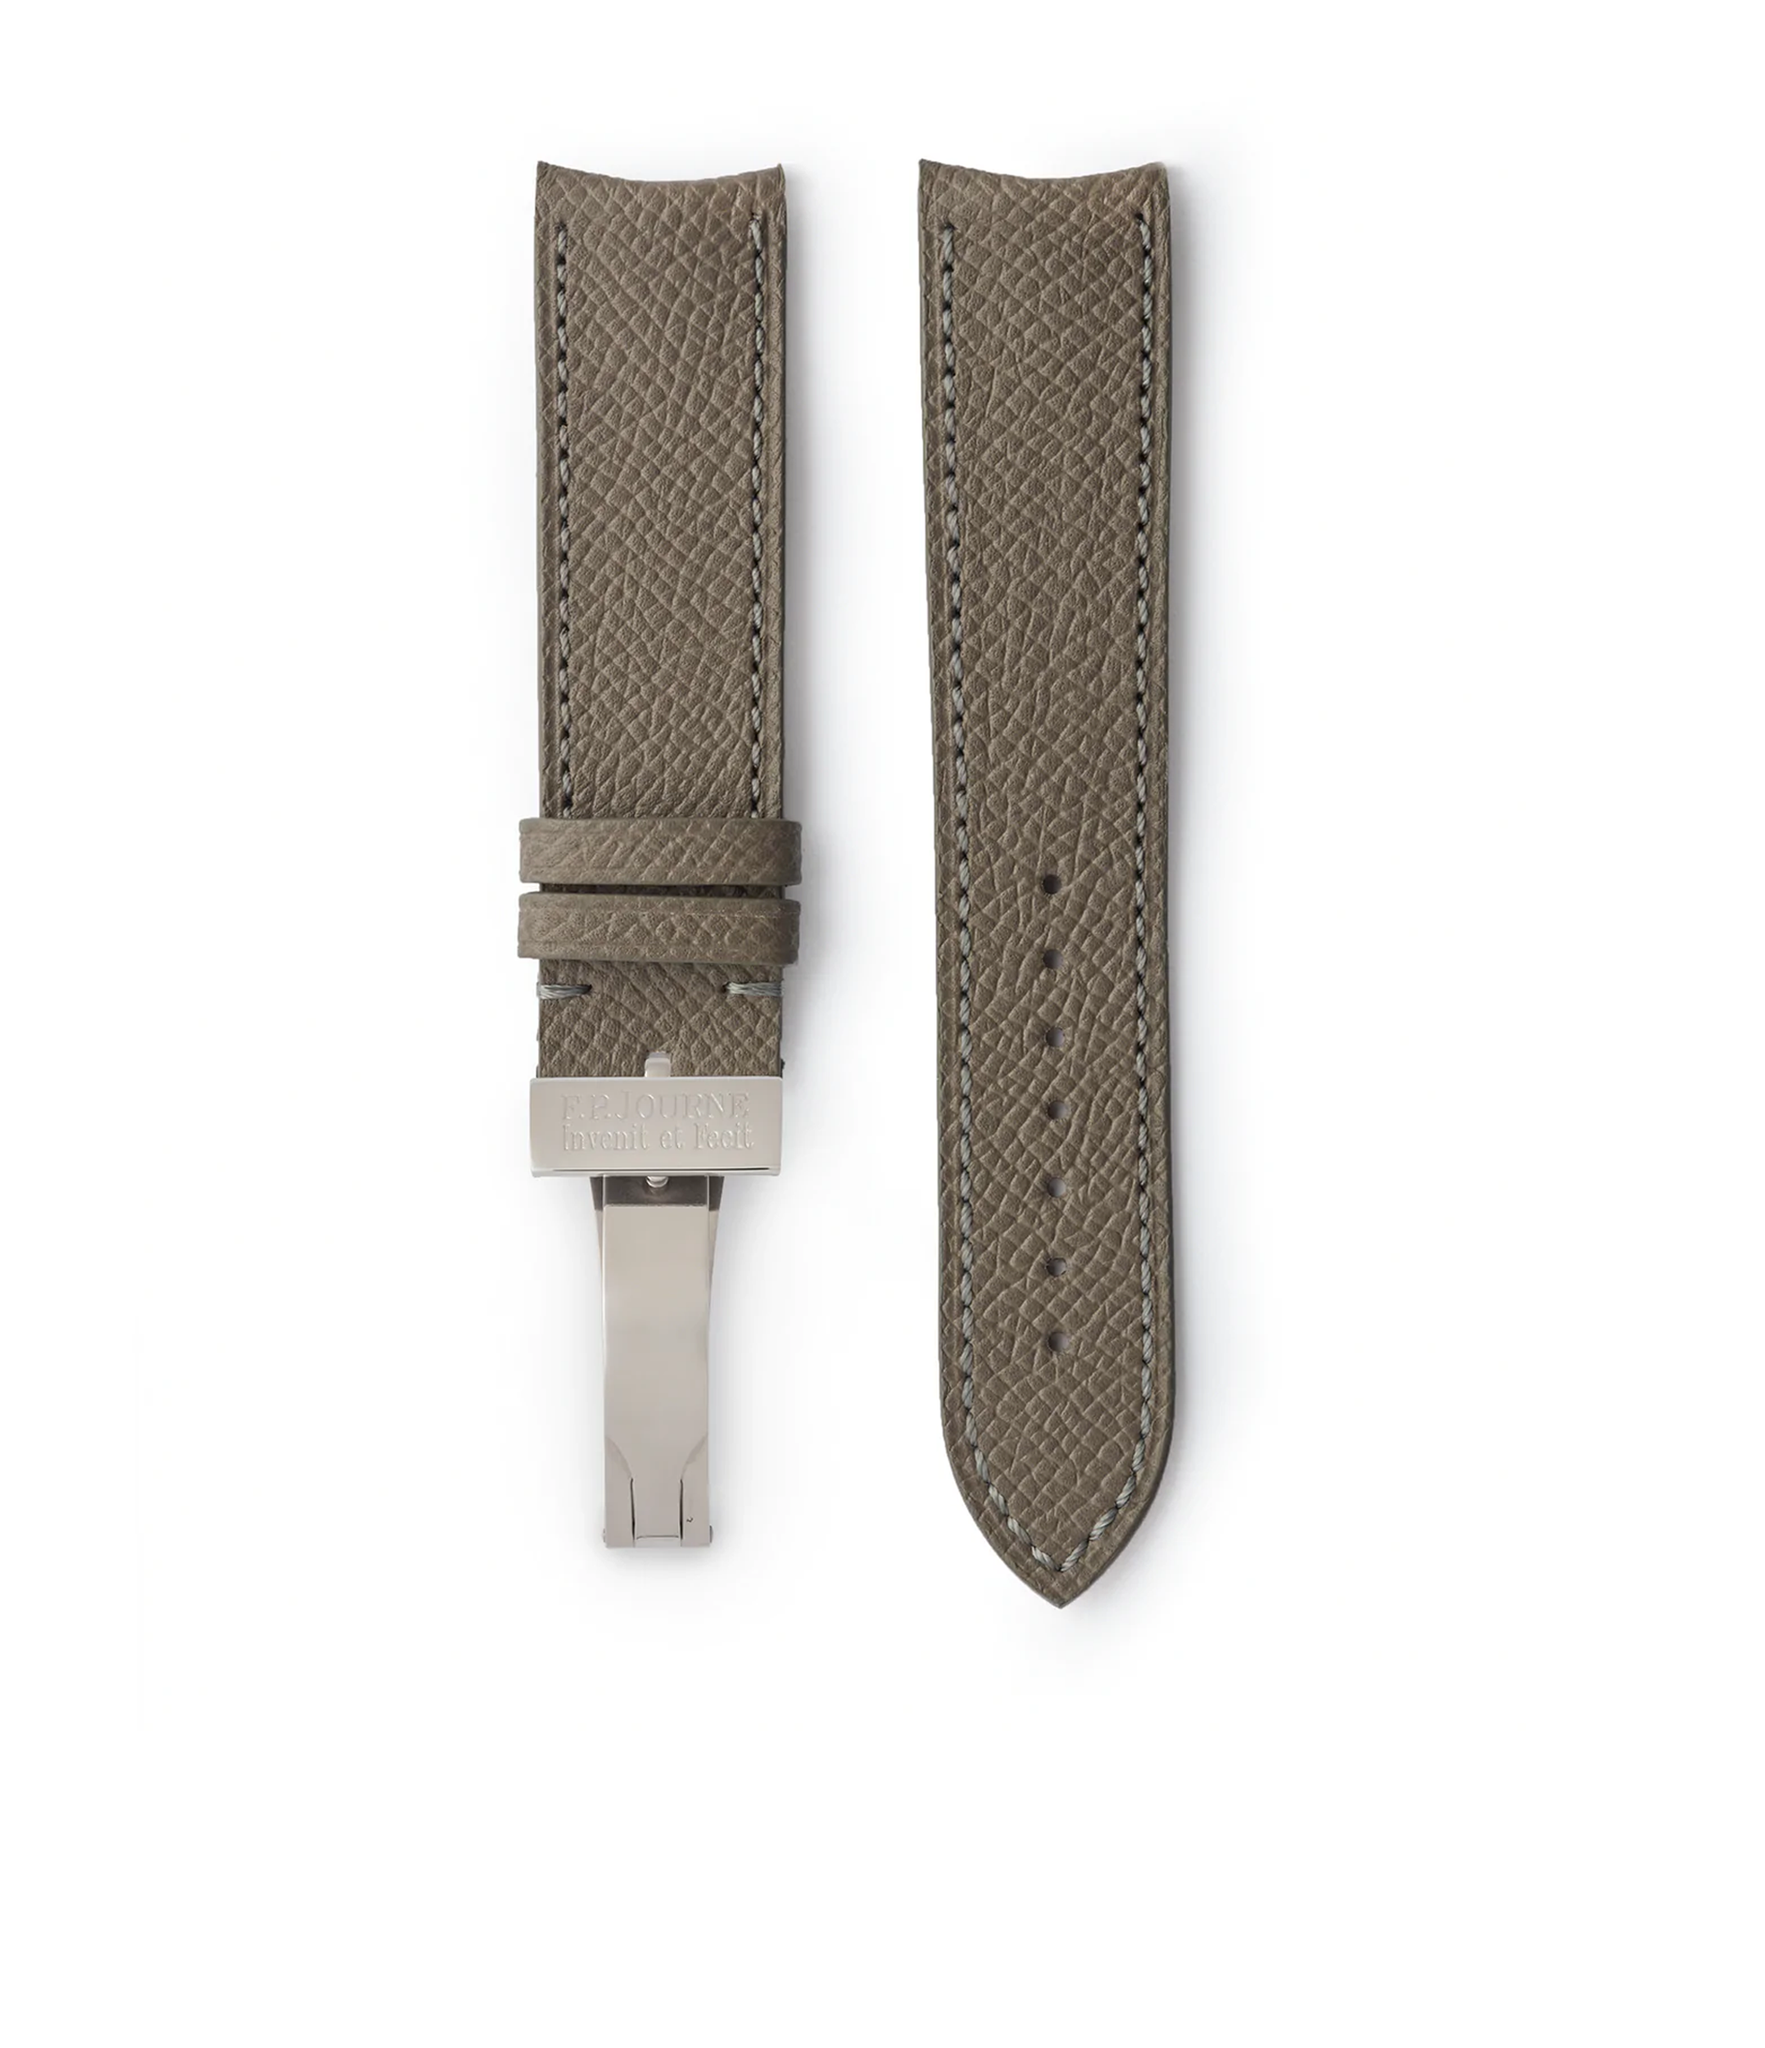 Buy 20mm x 19mm Stockholm Molequin F. P. Journe curved watch strap stone grey grained leather quick-release springbars buckle handcrafted European-made for sale online at A Collected Man London